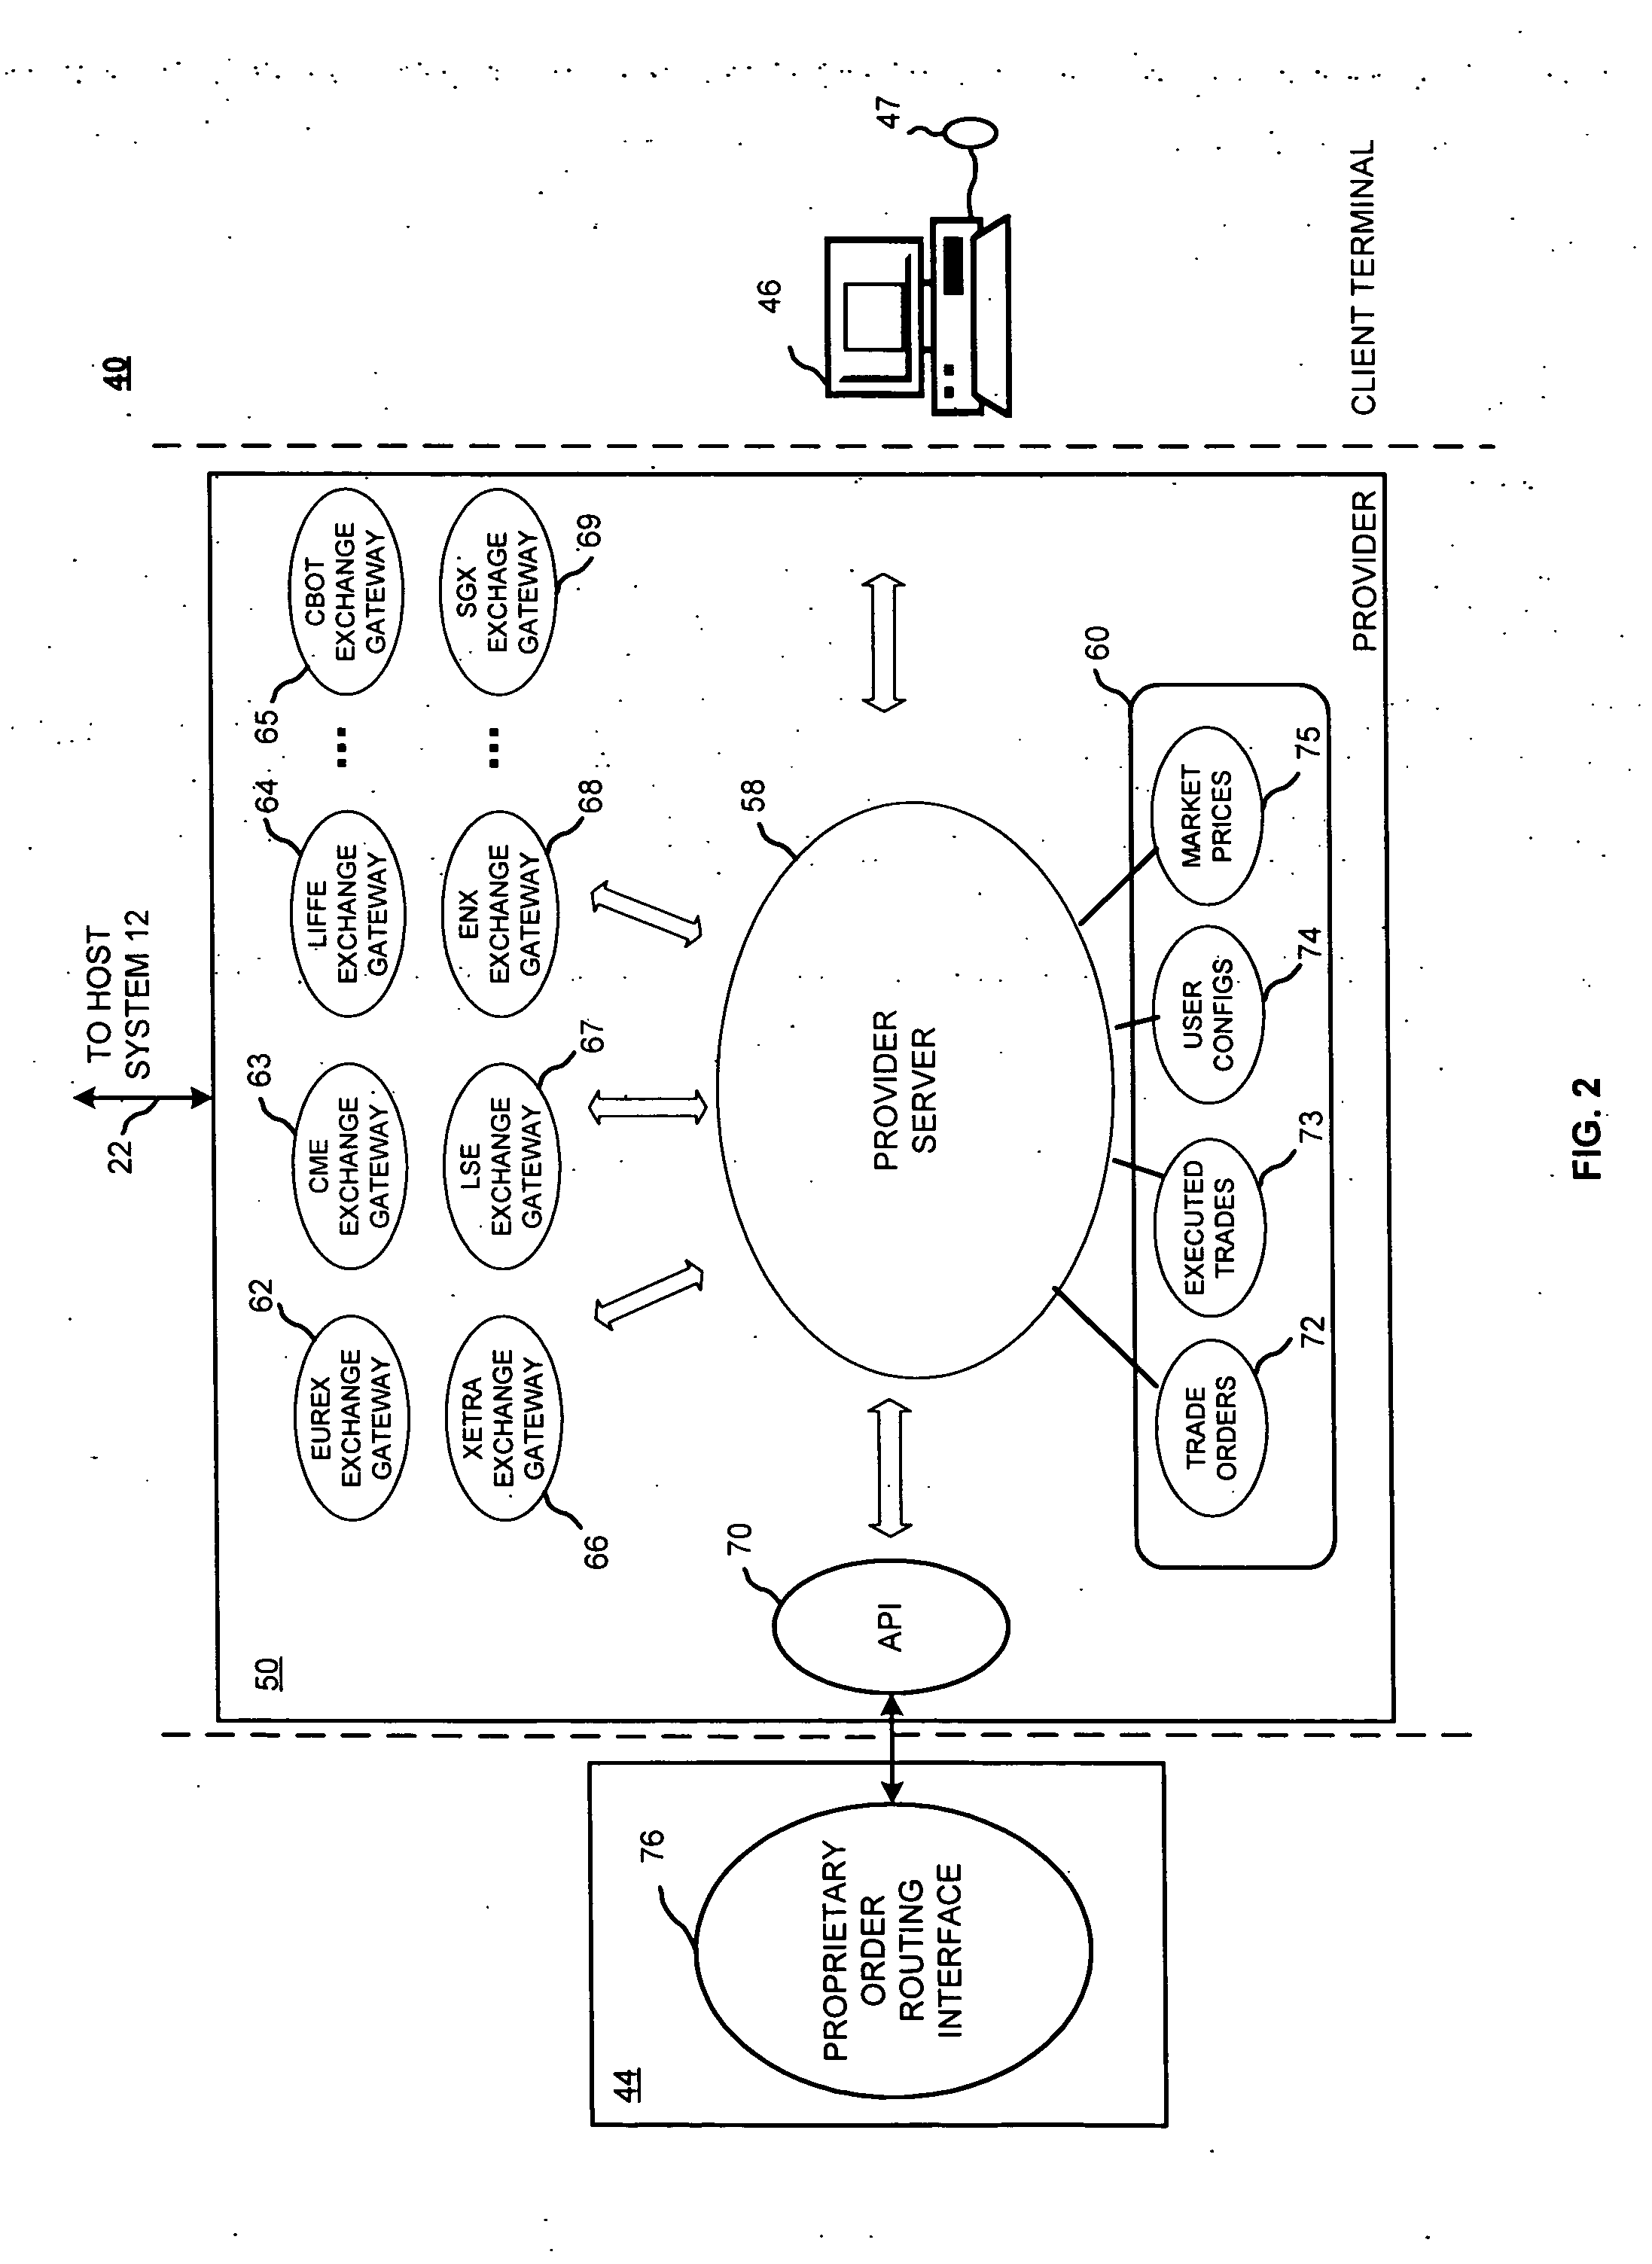 System and method for placing a trade order for a tradeable instrument on an electronic exchange